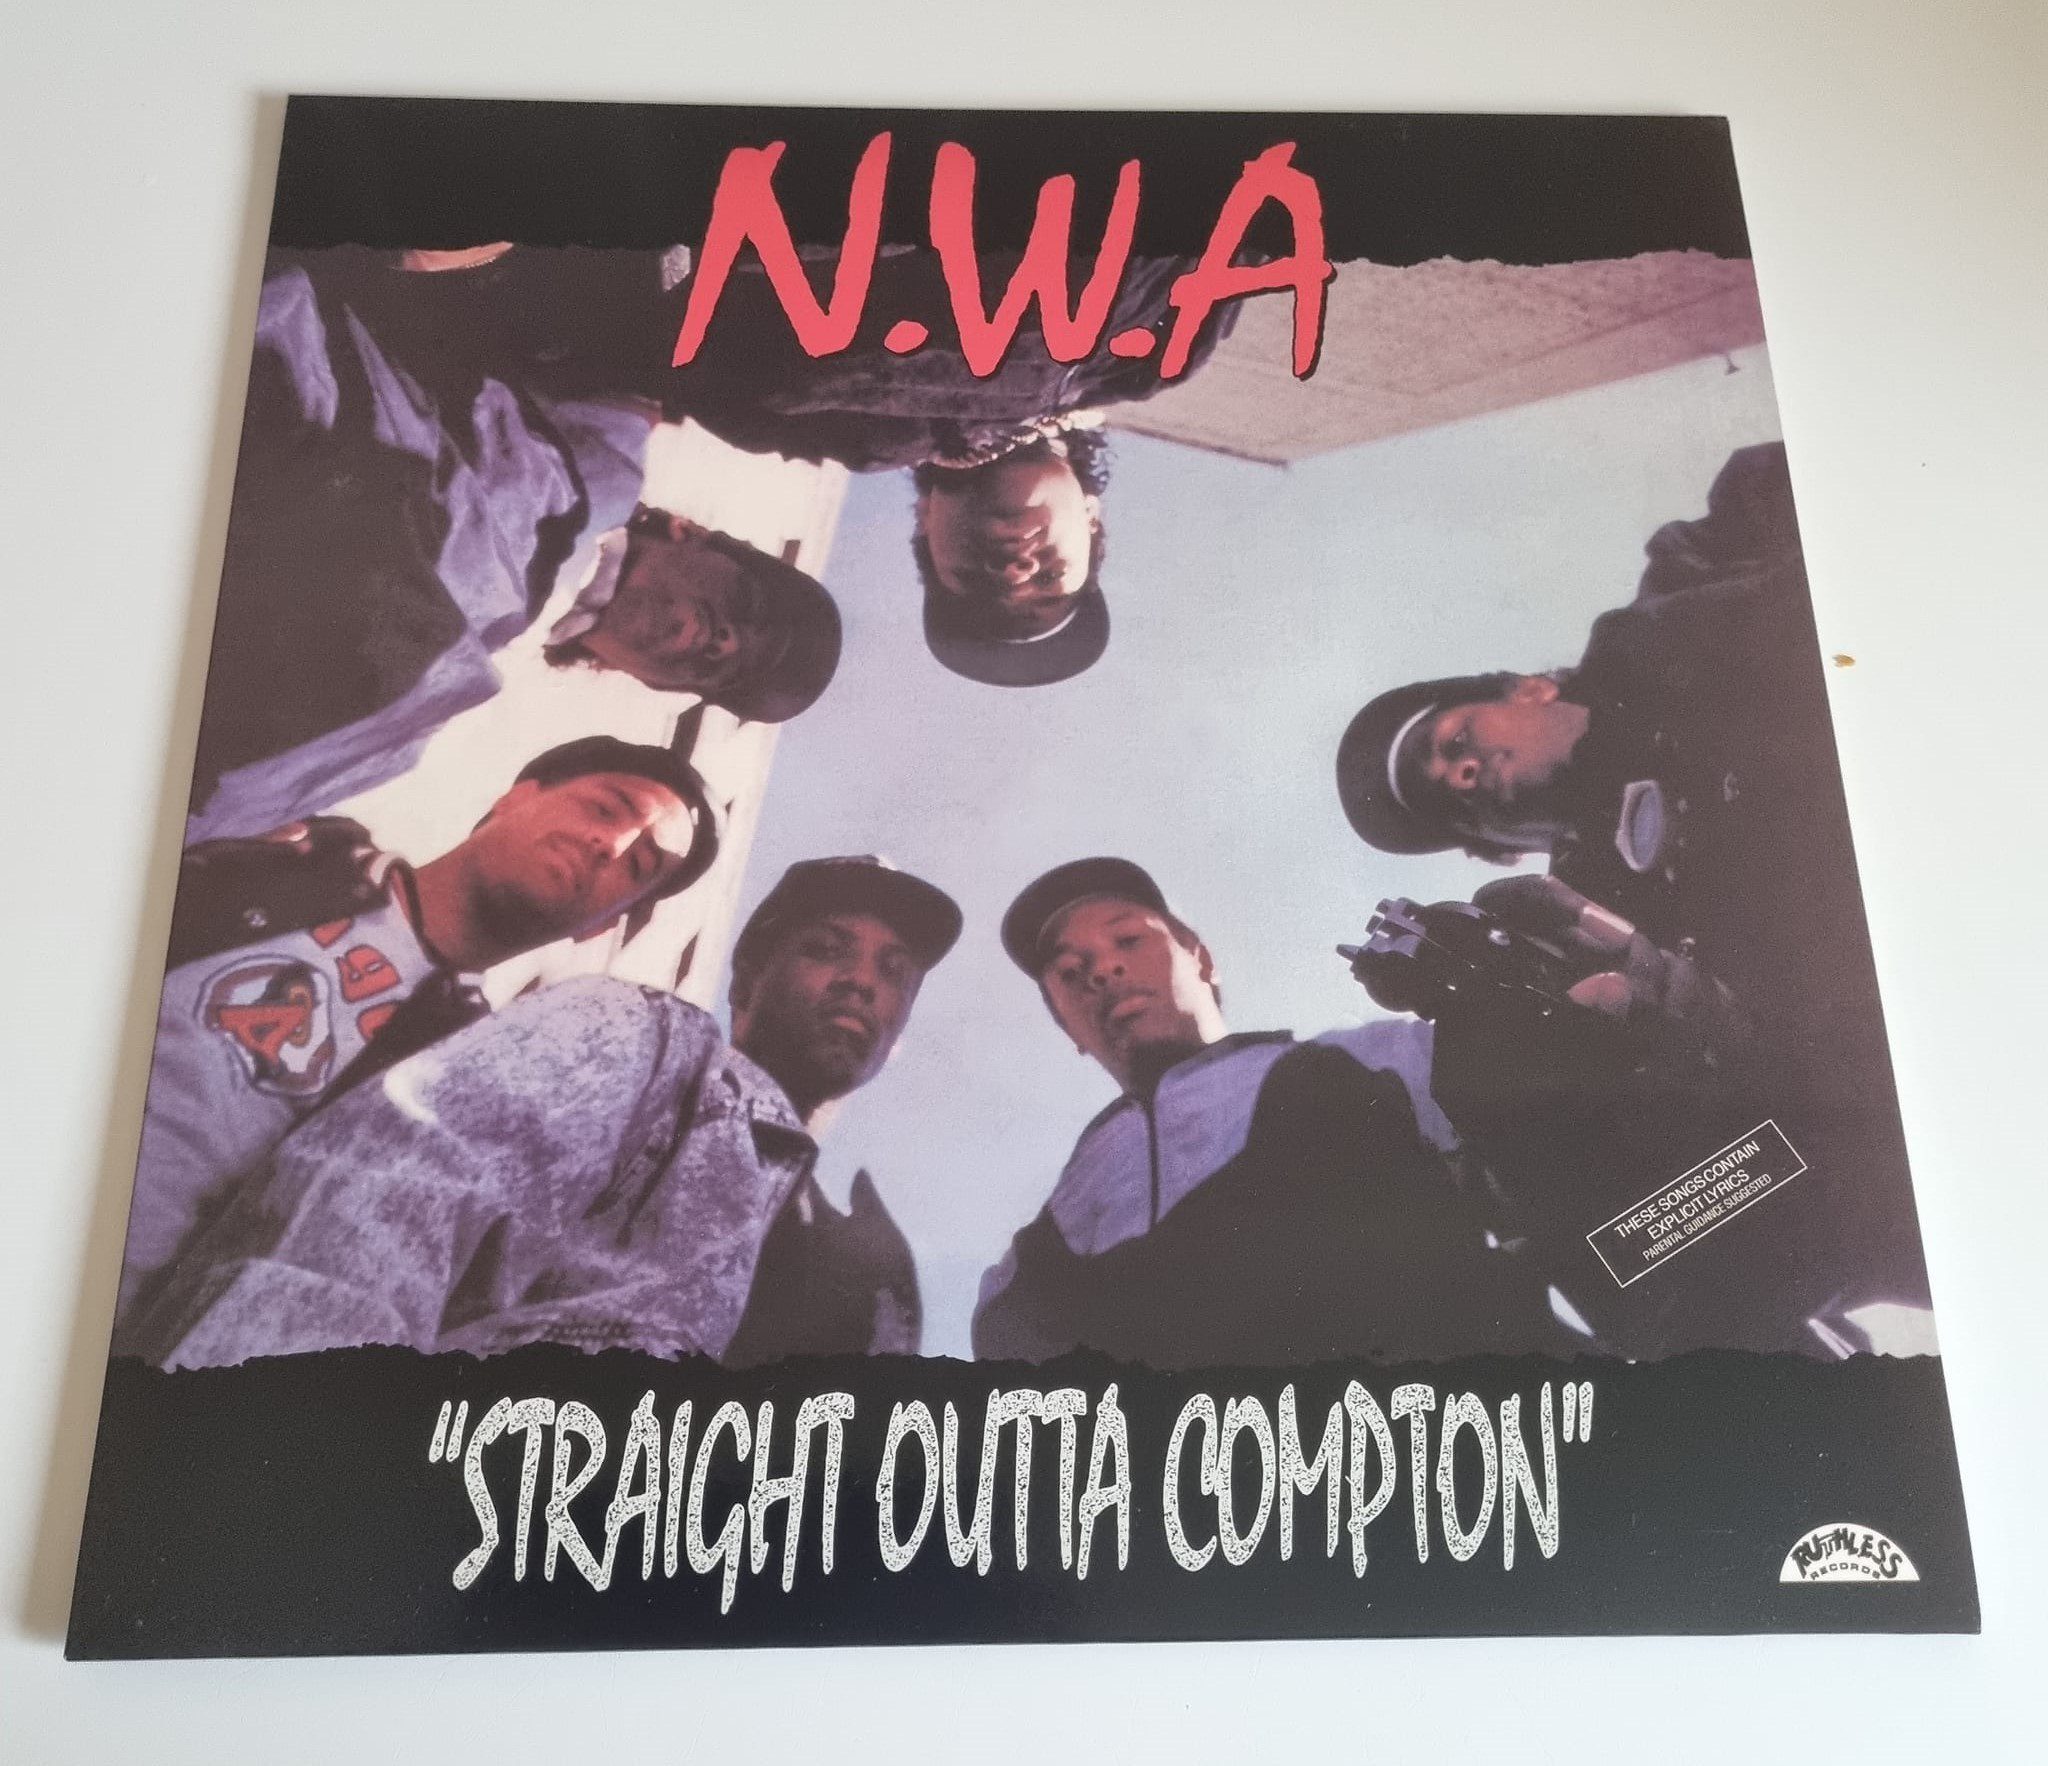 Buy this rare NWA record by clicking here